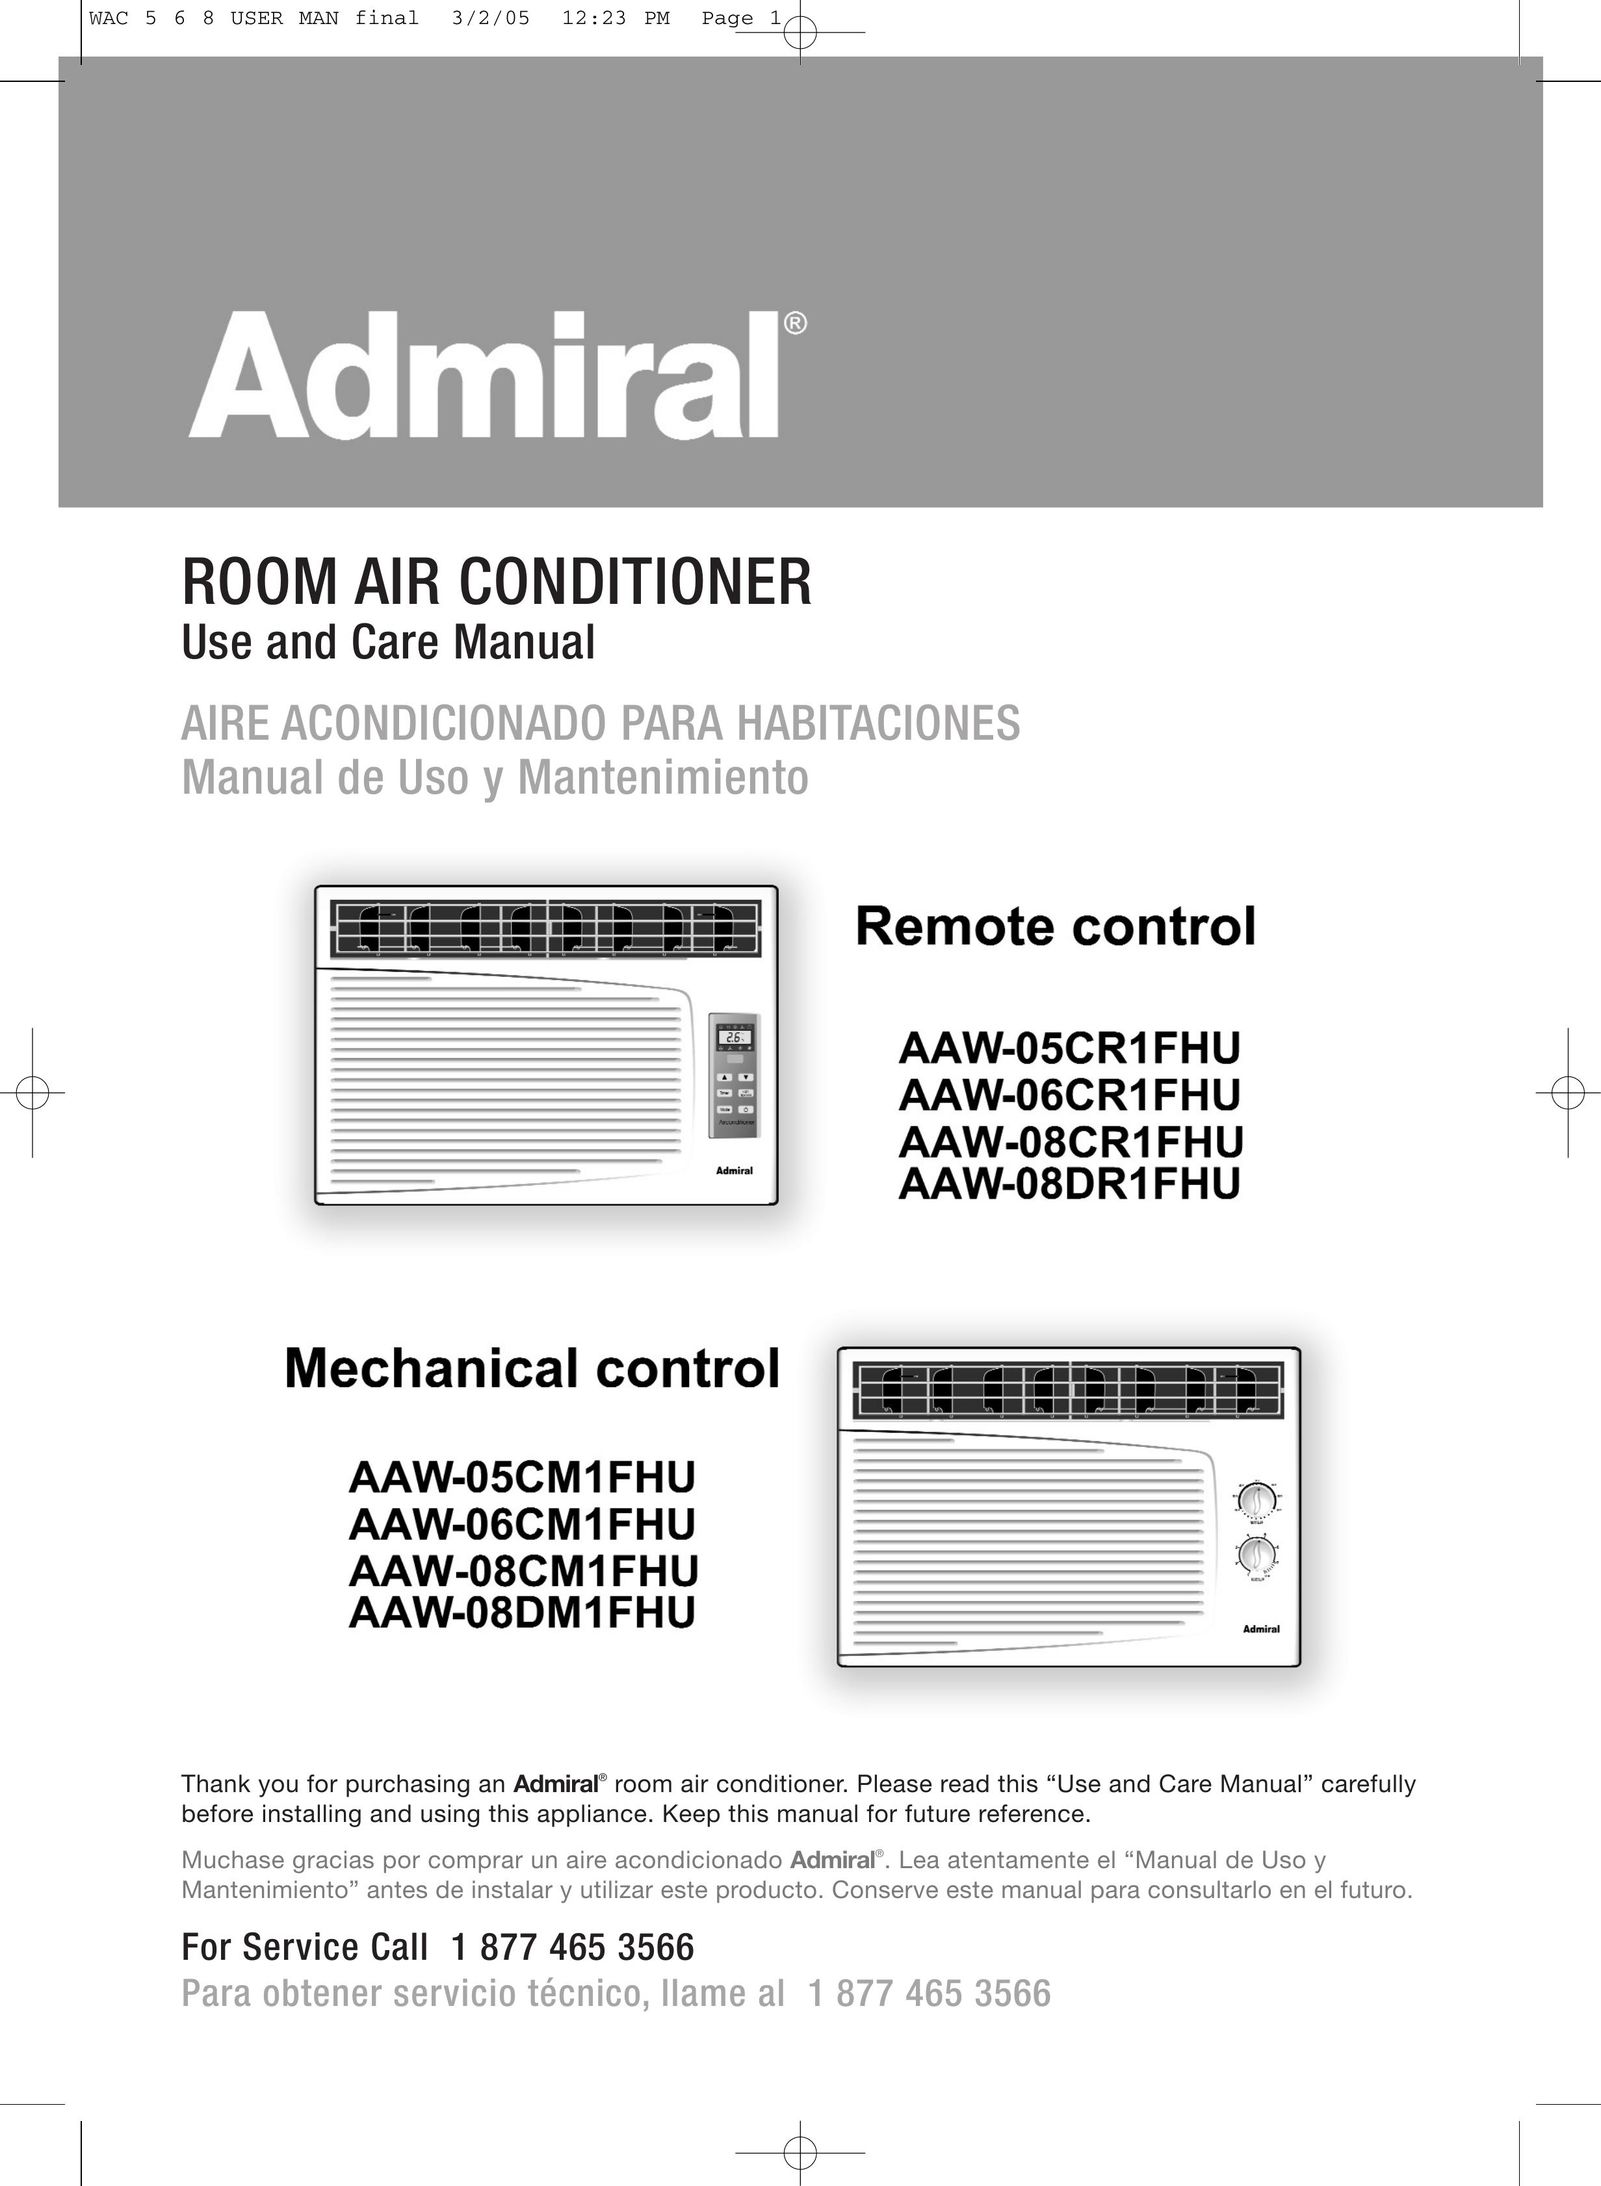 Admiral AAW-08CM1FHU Air Conditioner User Manual